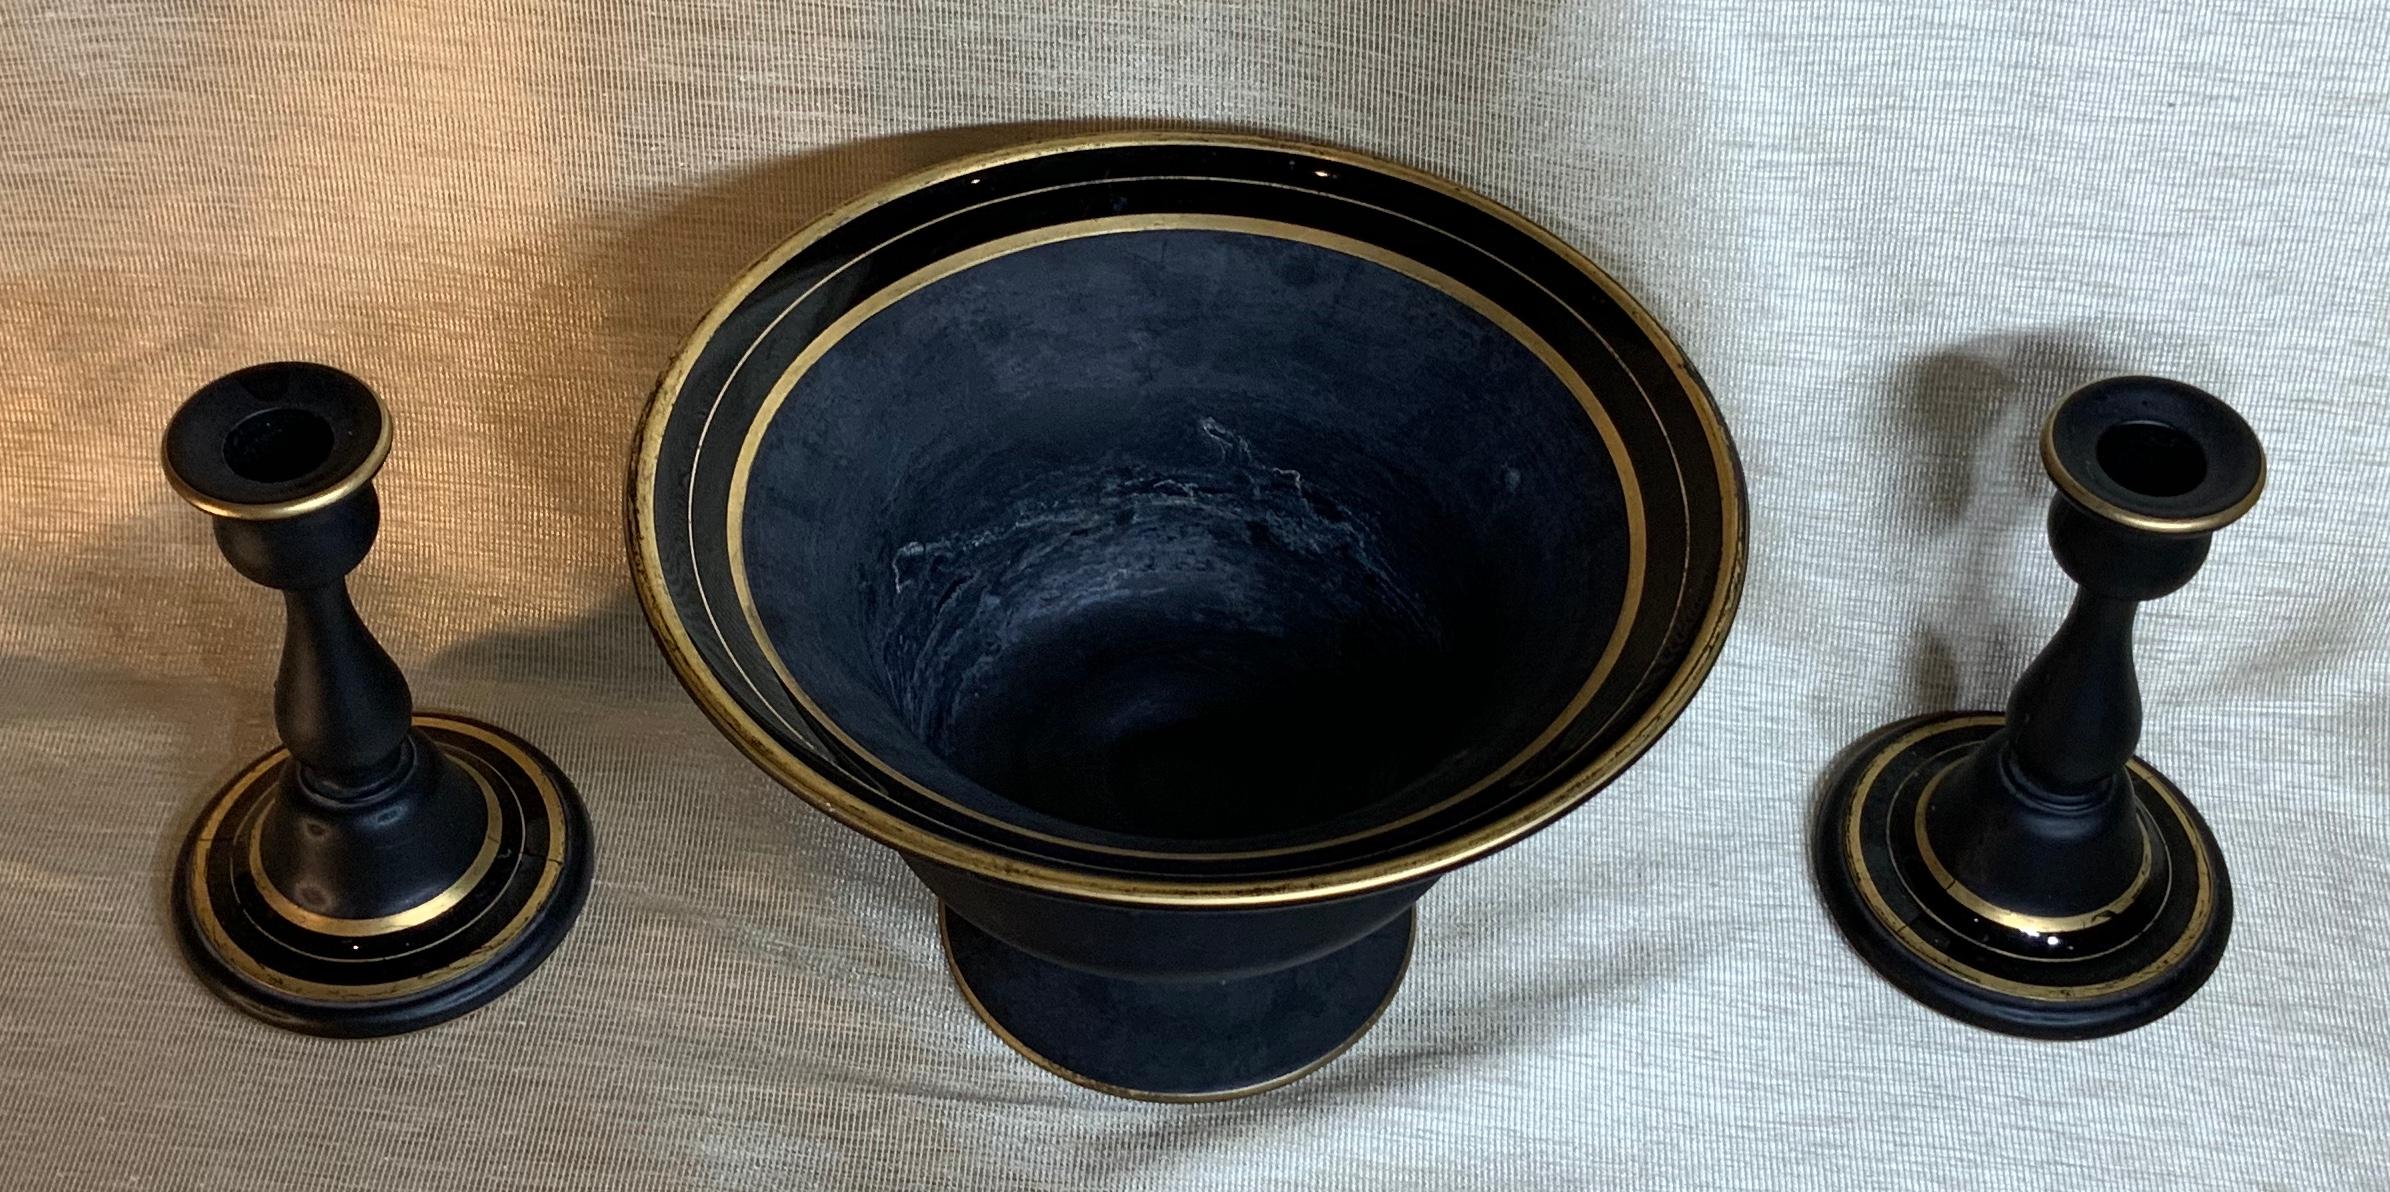 Elegant set of black pressed glass with hand painted gold trimming of one center bowl and pair of matching glass candlestick. Beautiful decorative set.
Candlestick size: 6.25” high x 4” wide
Bowl size: 9.75” wide x 6.25” high.